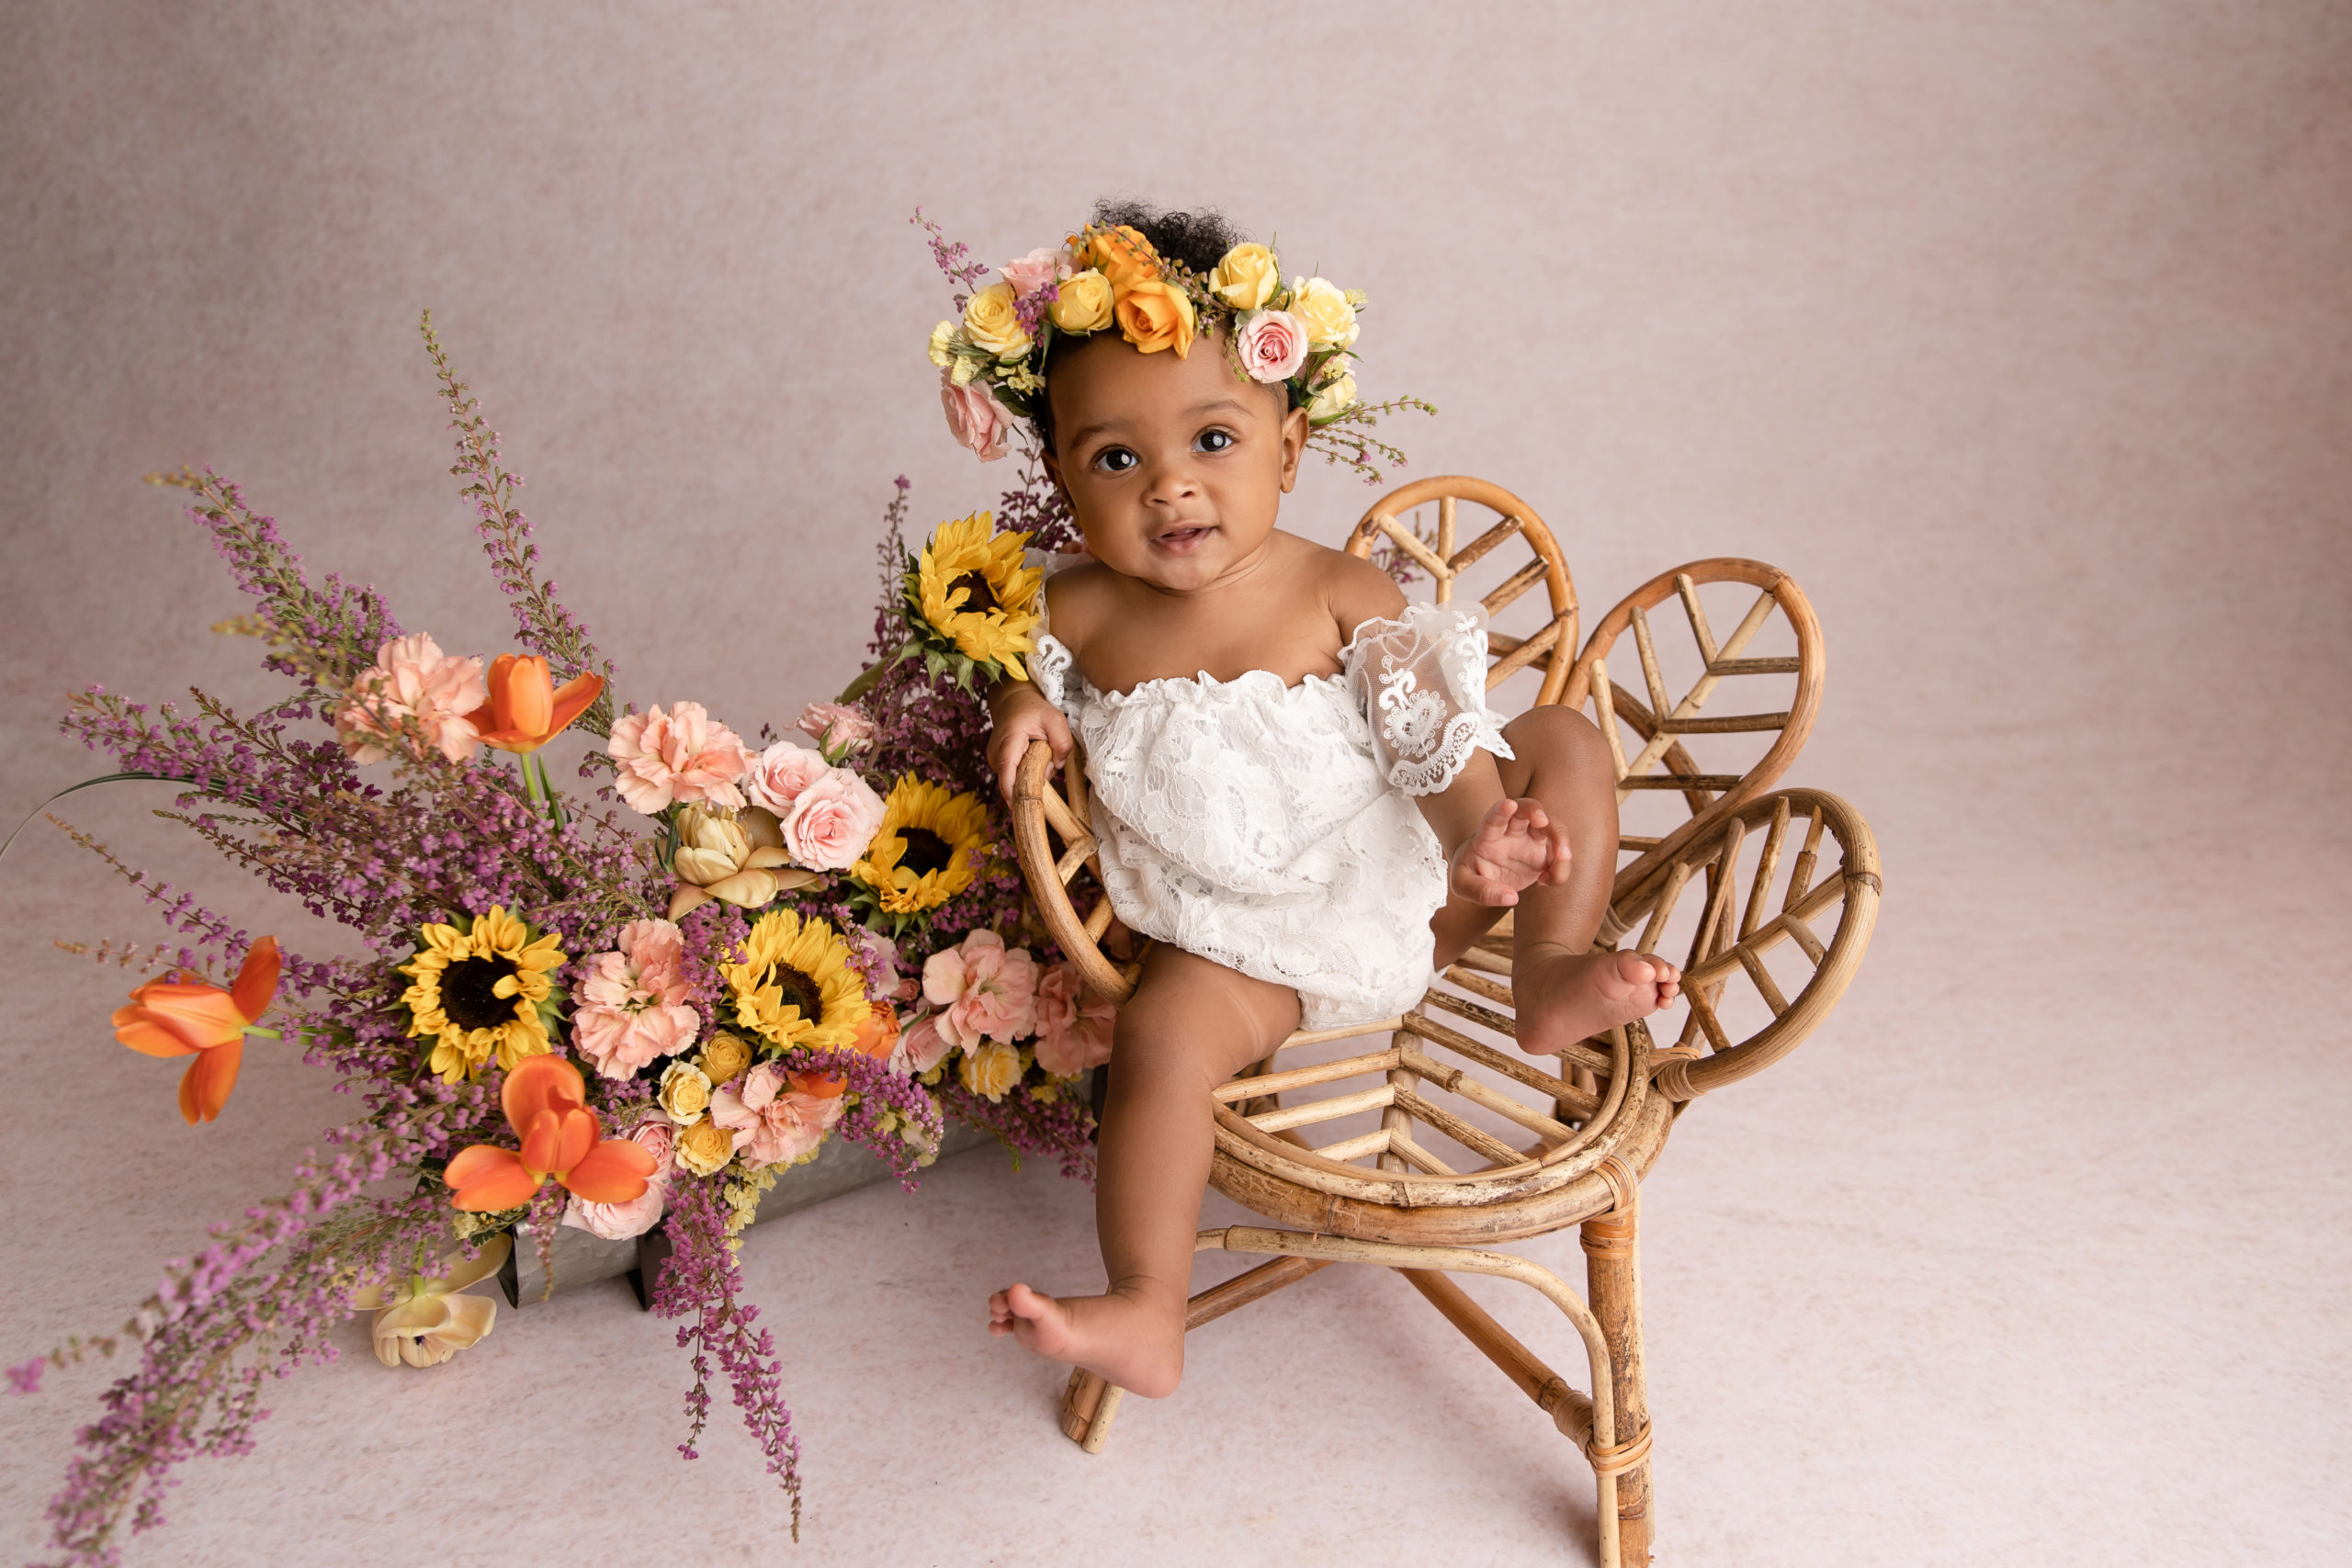 baby girl sitting in wicker chair with floral crown and matching arrangement